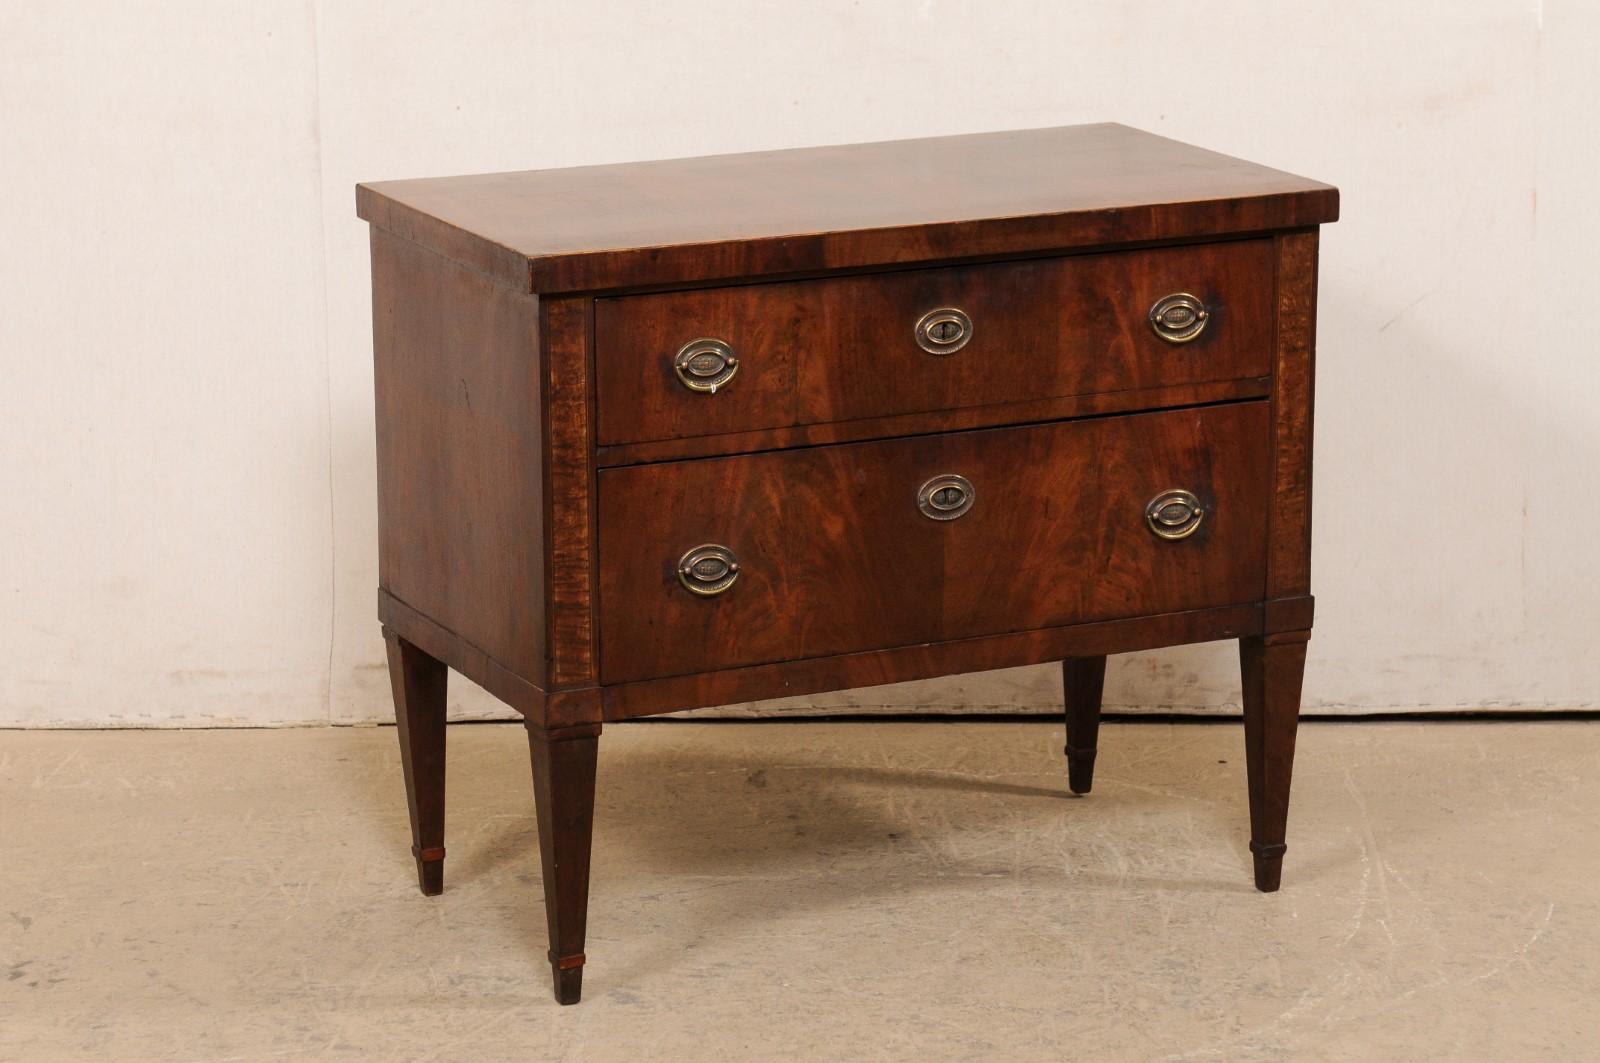 An Italian raised chest, with matchbook veneers, circa 1960's. This mid-century chest from Italy features a rectangular-shaped, matchbook veneer top, over a chase which houses a pair of stacked, graduated and dove-tailed drawers, and raised nicely